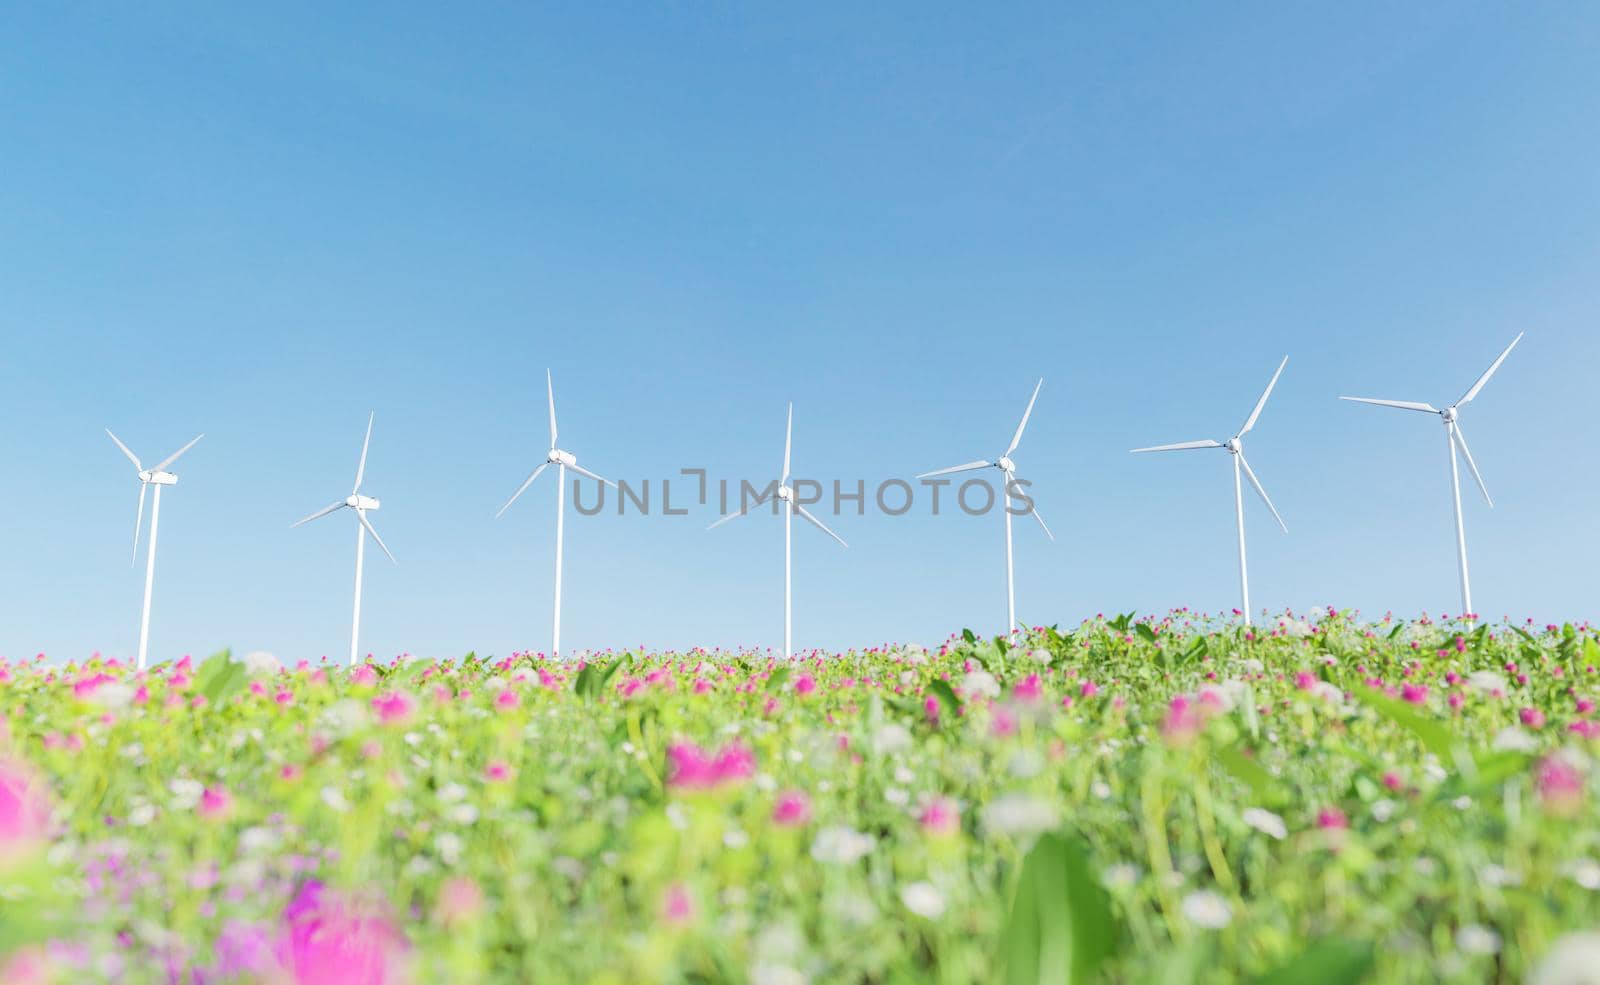 field full of flowers with wind turbines in the background by asolano